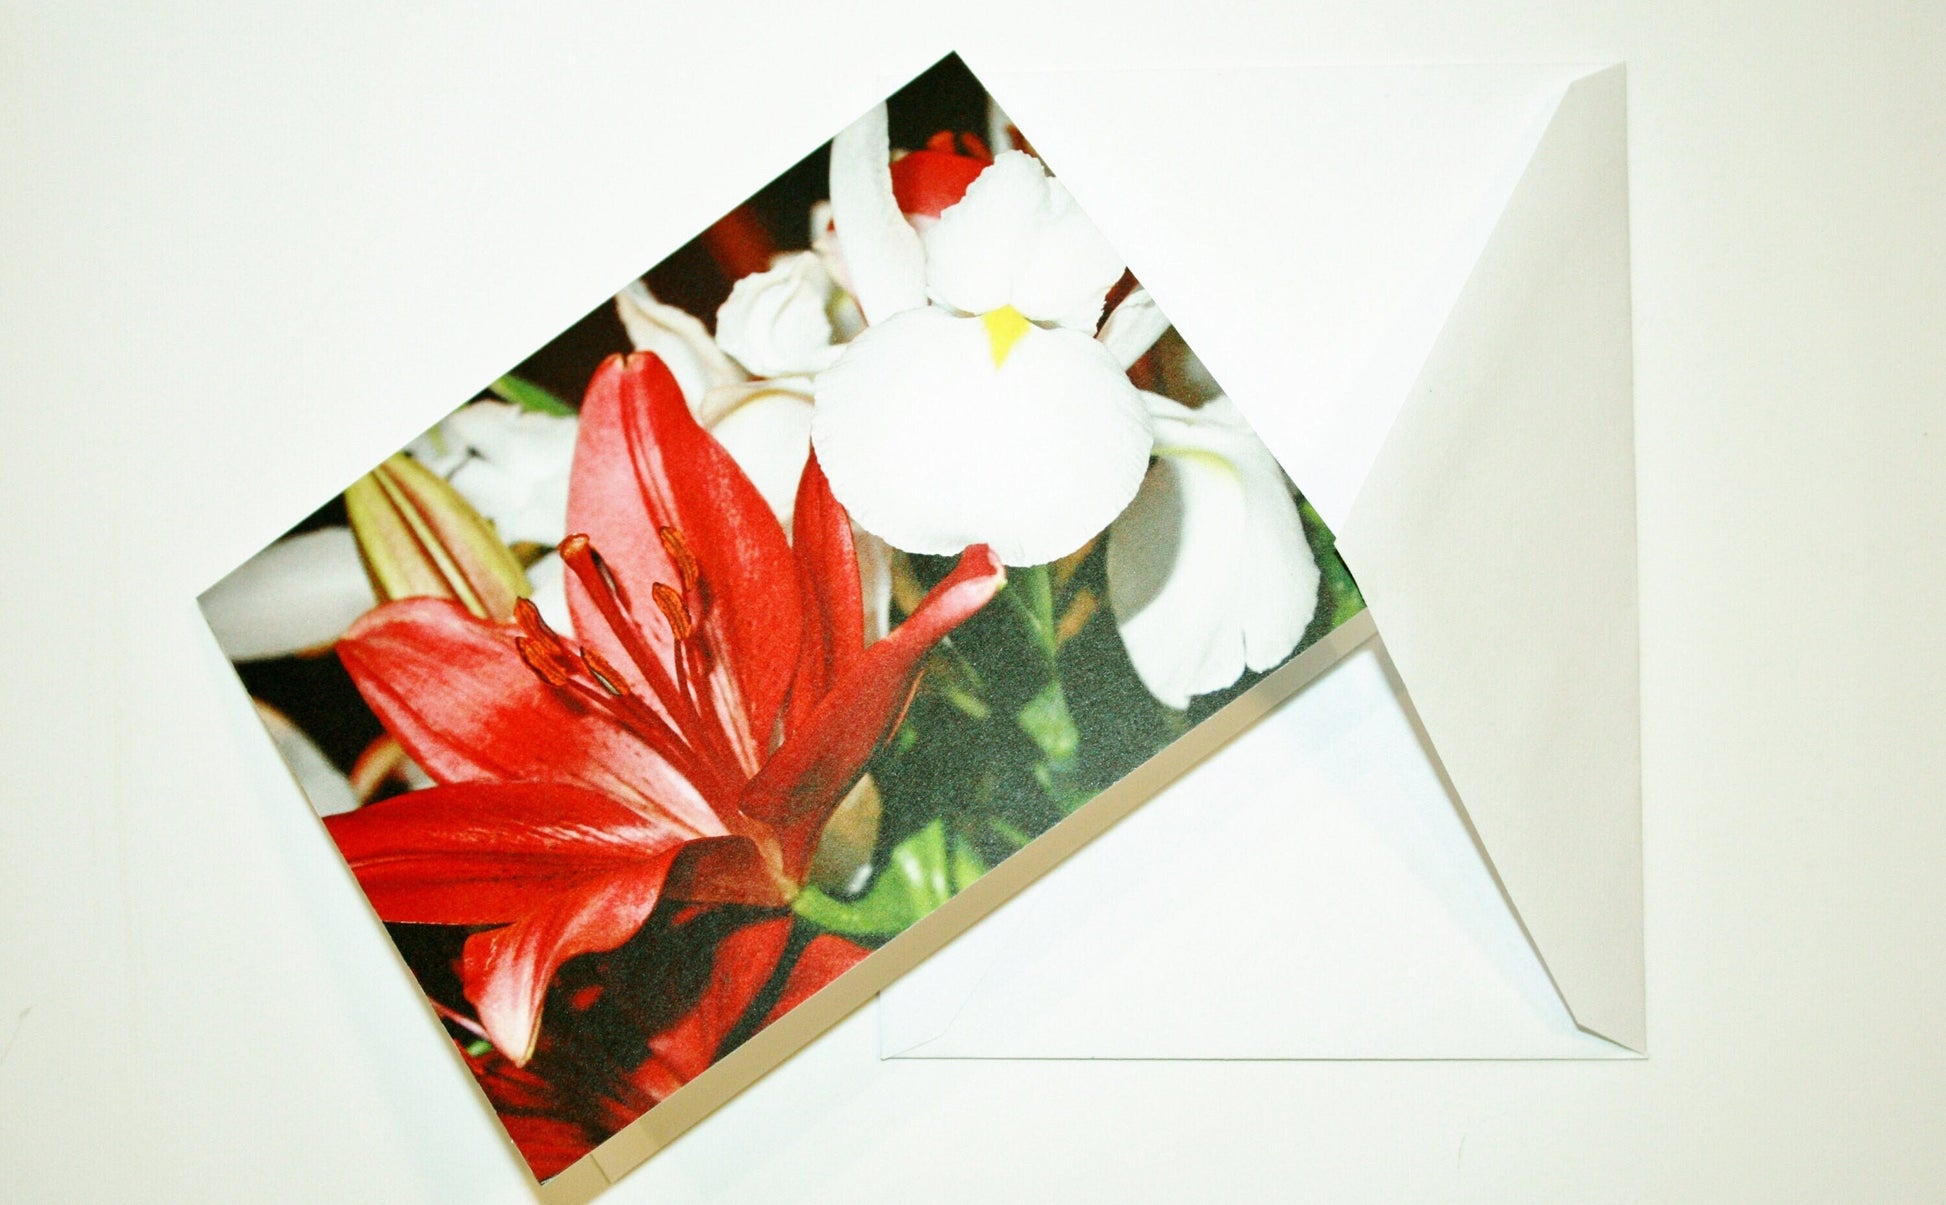 Blank Note Cards & Envelopes Original Photographs Many designs available Flower lovers personal gift unique photo card